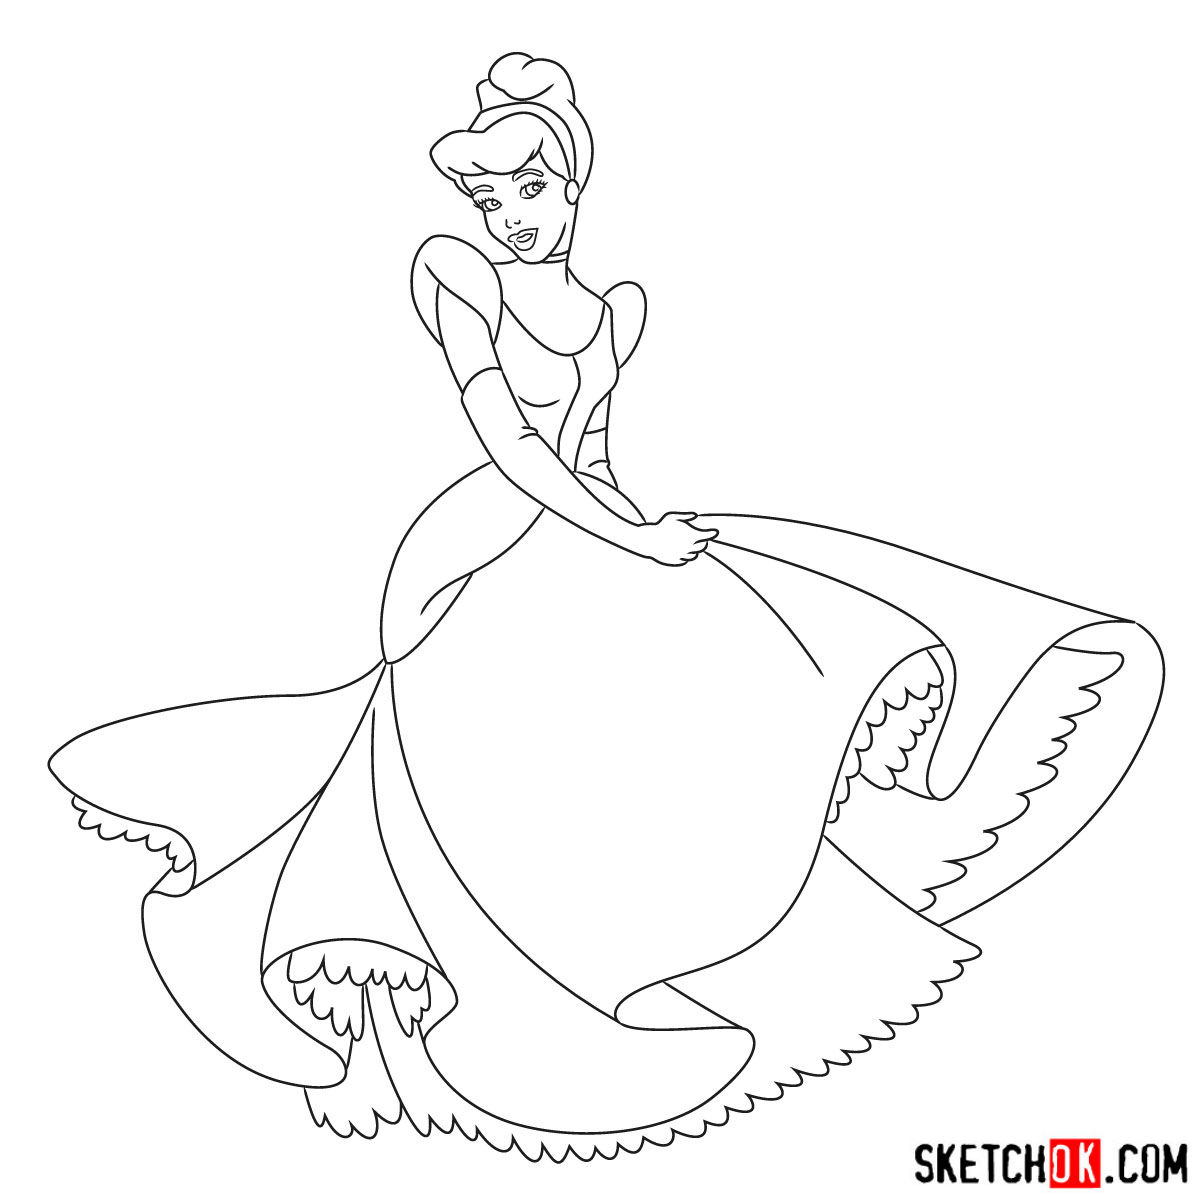 How to draw dancing Cinderella - step 14